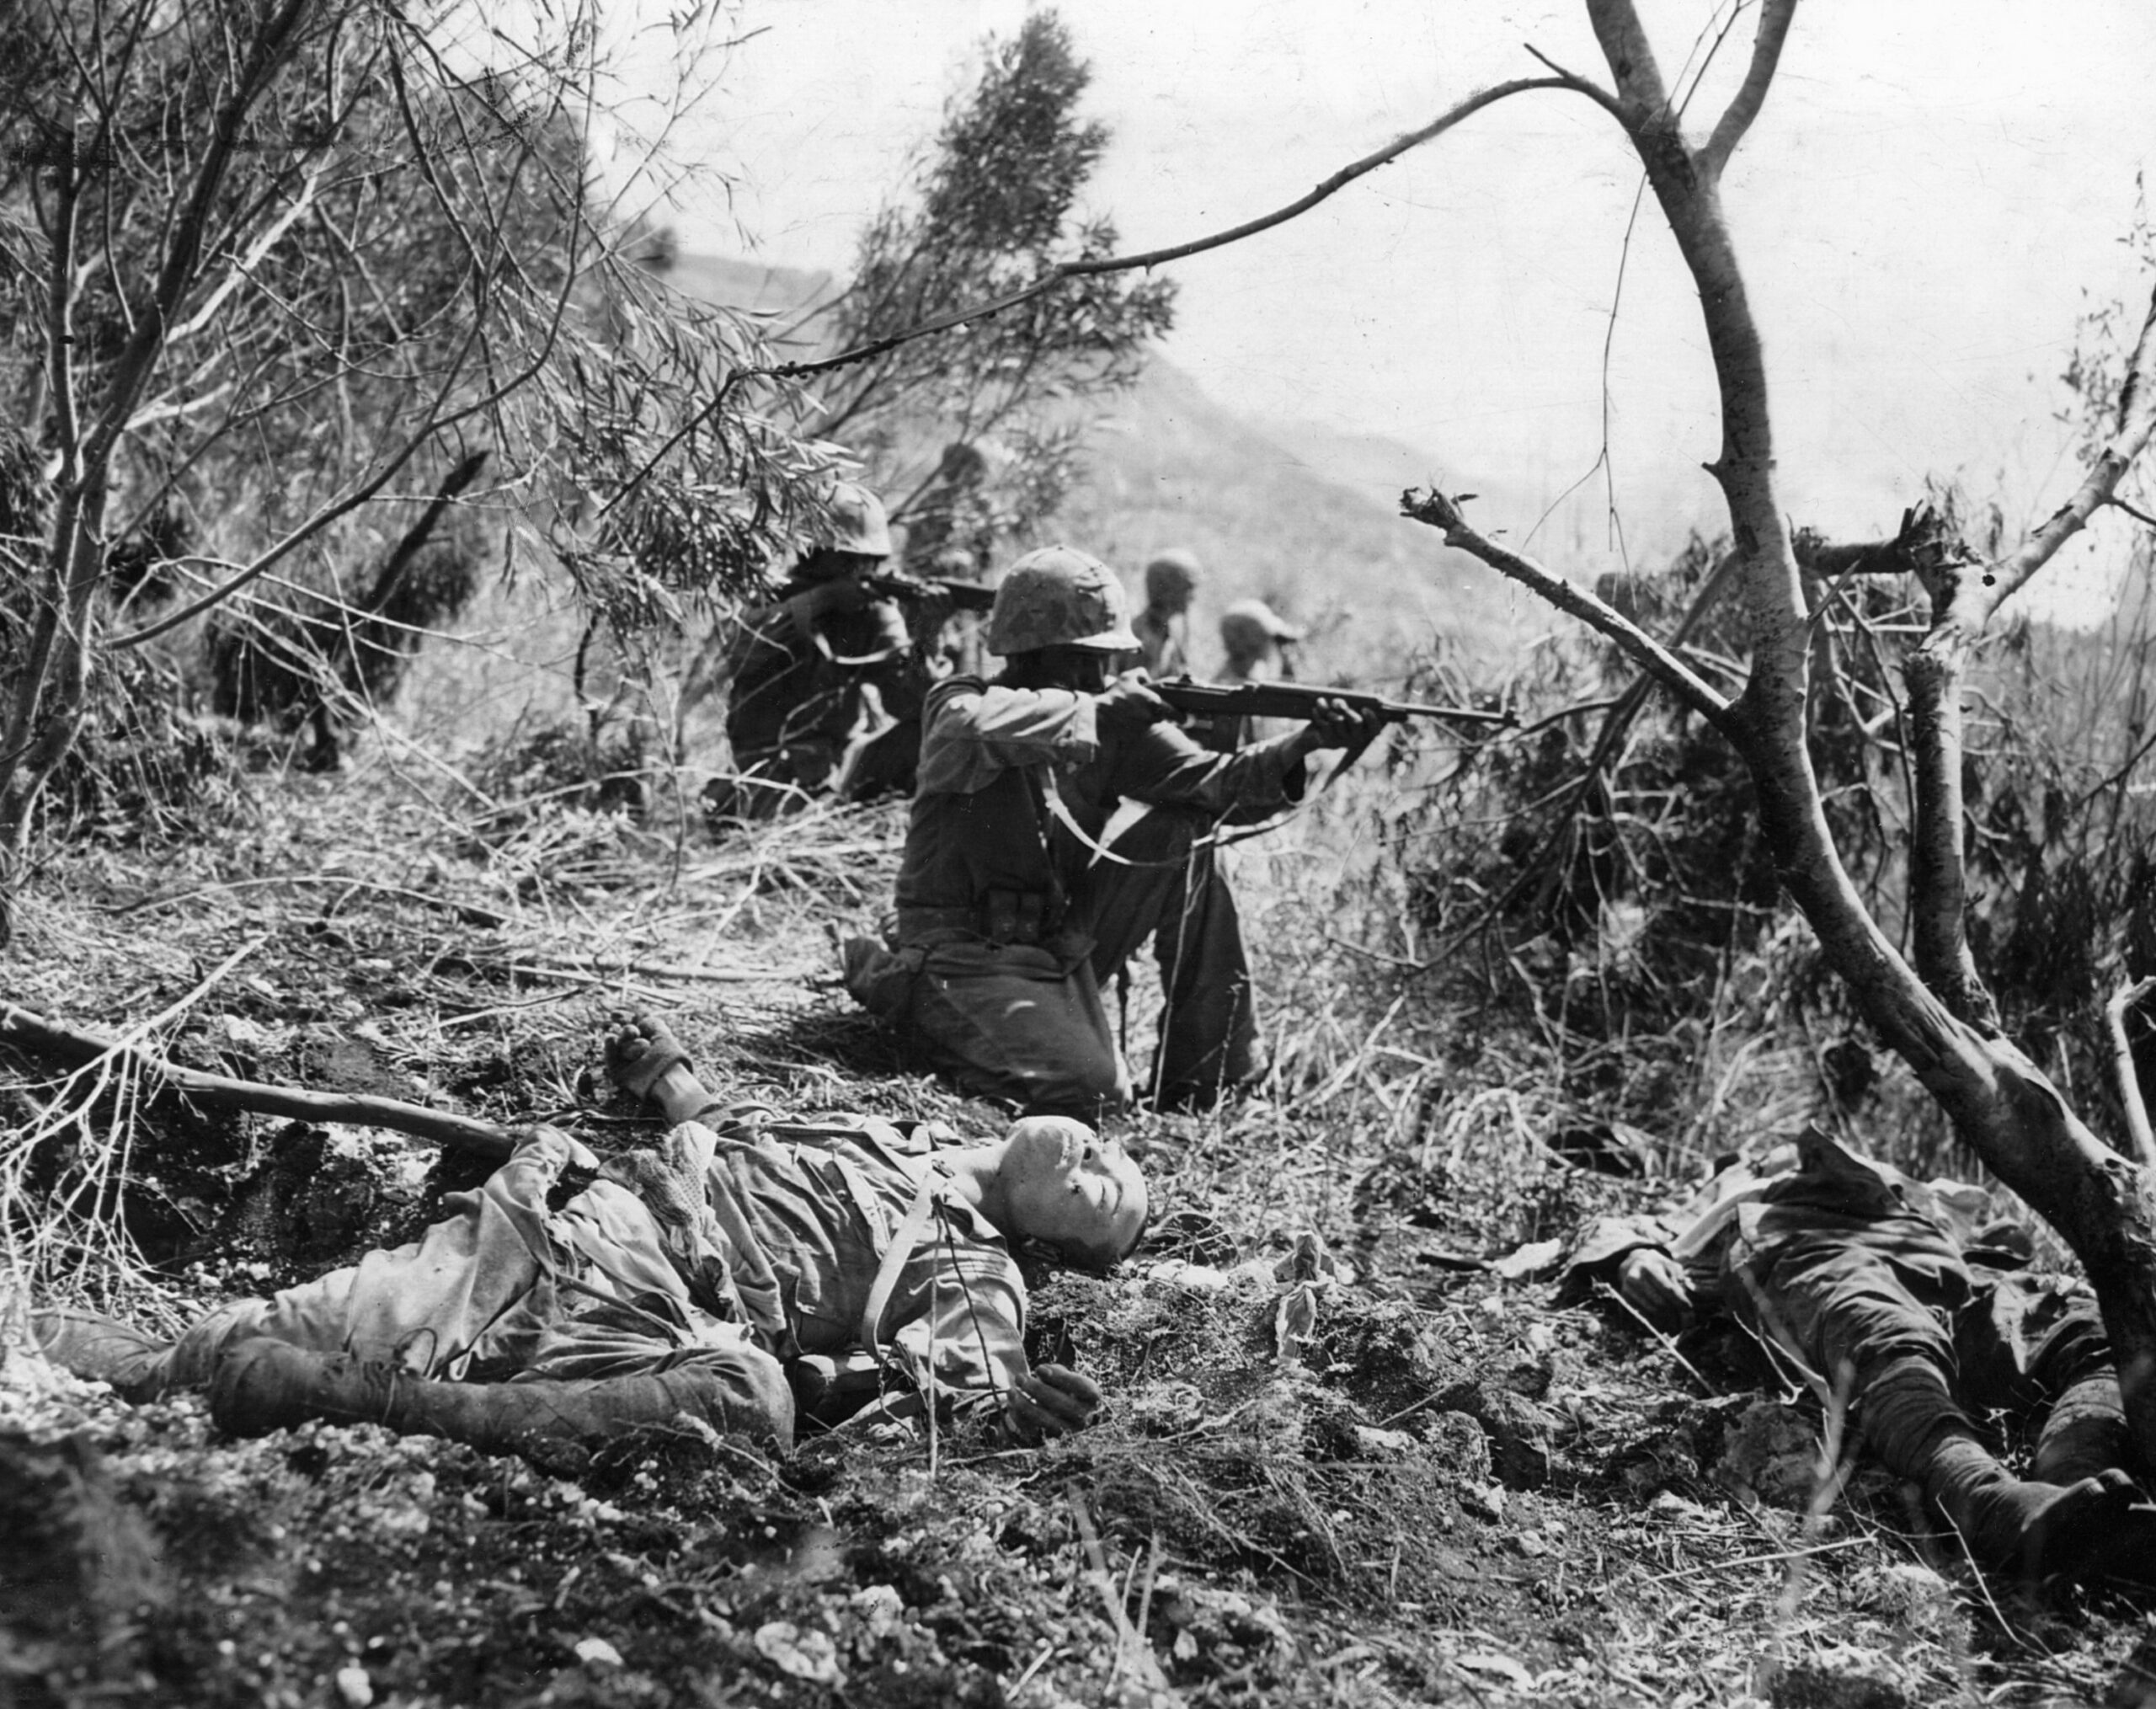 Surrounded by the bodies of slain Japanese soldiers, U.S. Marines open fire on an enemy position during their advance toward the western beach of the island.